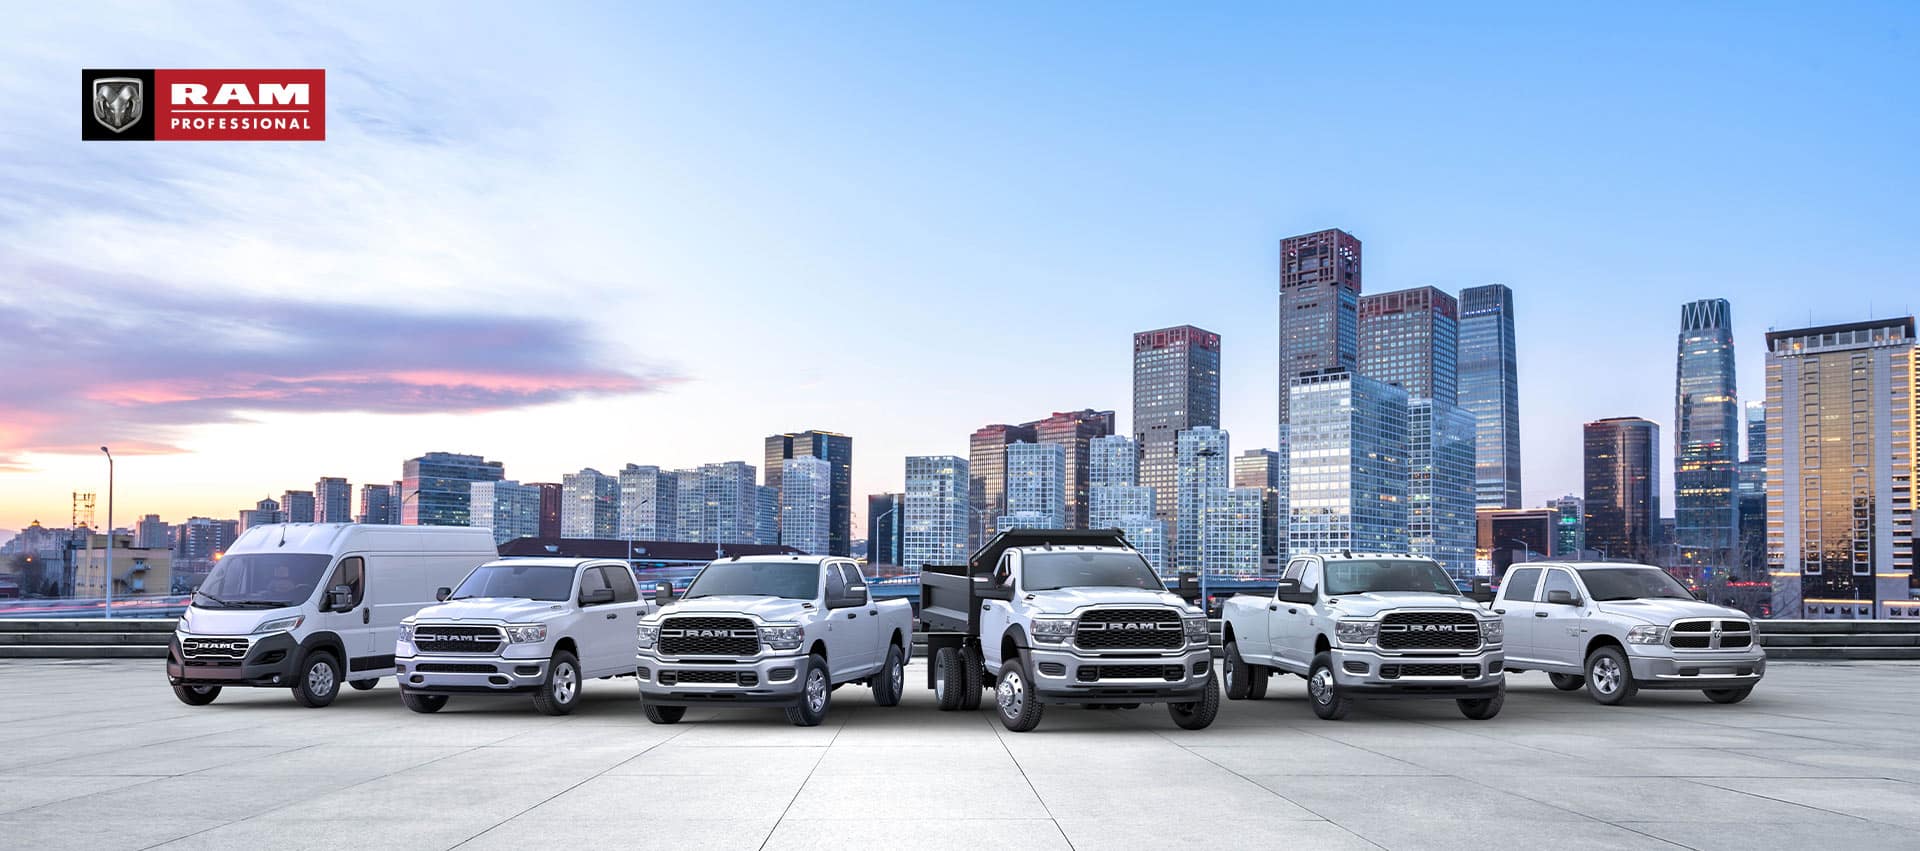 The Ram Brand lineup, all in white, parked side-by-side with a cityscape at dusk in the background. Beginning on the left: a 2023 Ram ProMaster 3500 High Roof Cargo Van, 2022 Ram ProMaster City Cargo Van, 2023 Ram 1500 Tradesman Crew Cab, 2023 Ram 5500 Tradesman Regular Cab with dump body, 2023 Ram 3500 Tradesman Crew Cab and 2023 Ram 1500 Classic Regular Cab. Ram Professional.